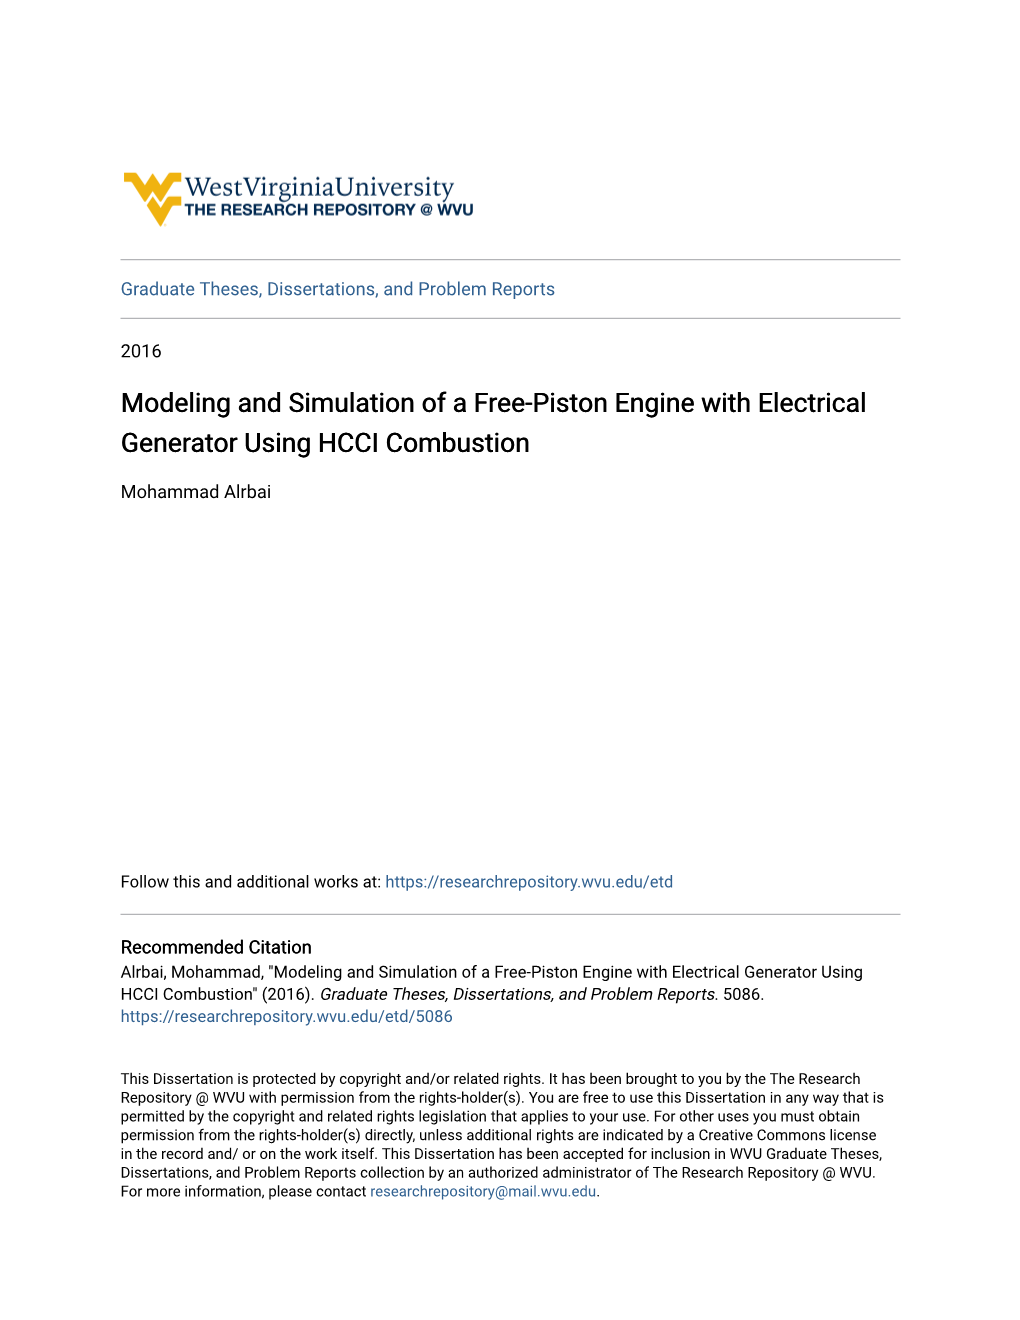 Modeling and Simulation of a Free-Piston Engine with Electrical Generator Using HCCI Combustion